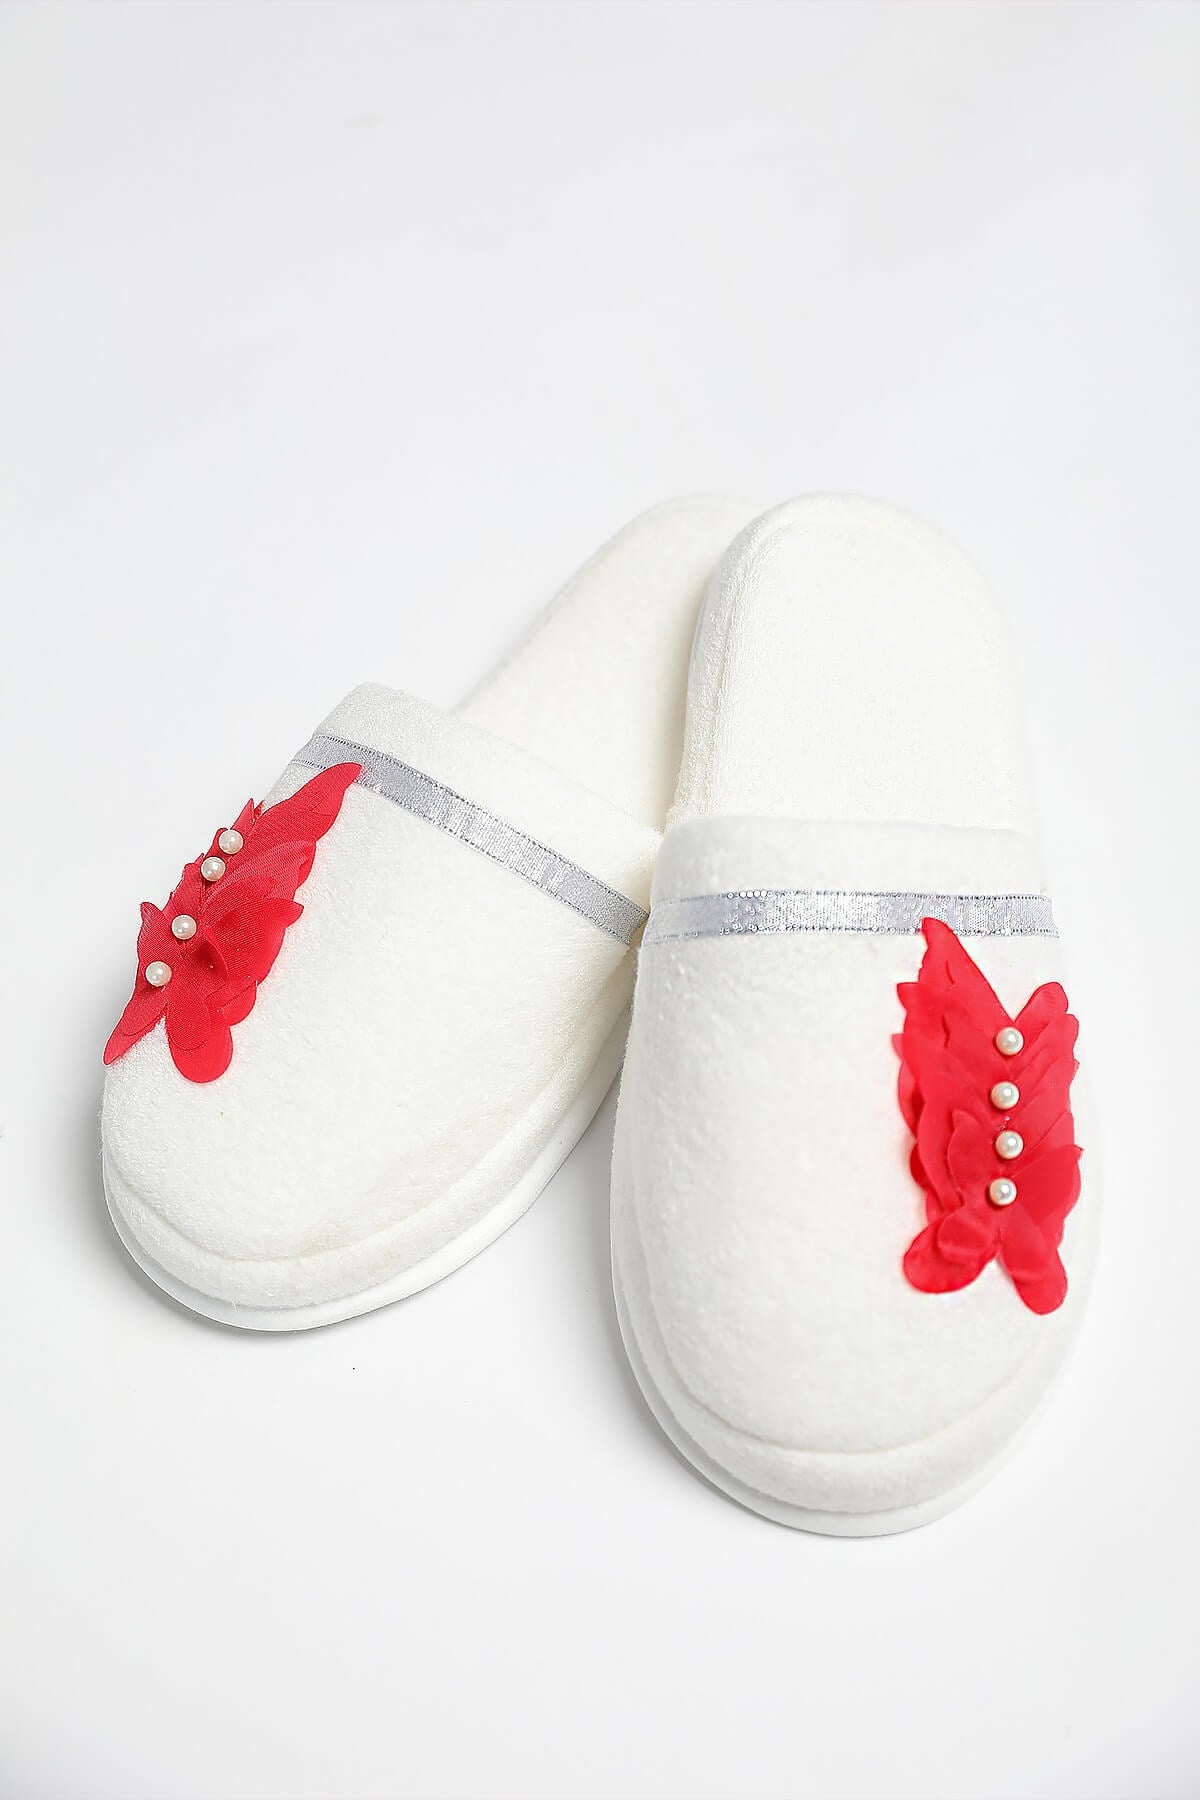 Shopymommy 757102 Butterfly Maternity Crown & Maternity Slippers Set Red